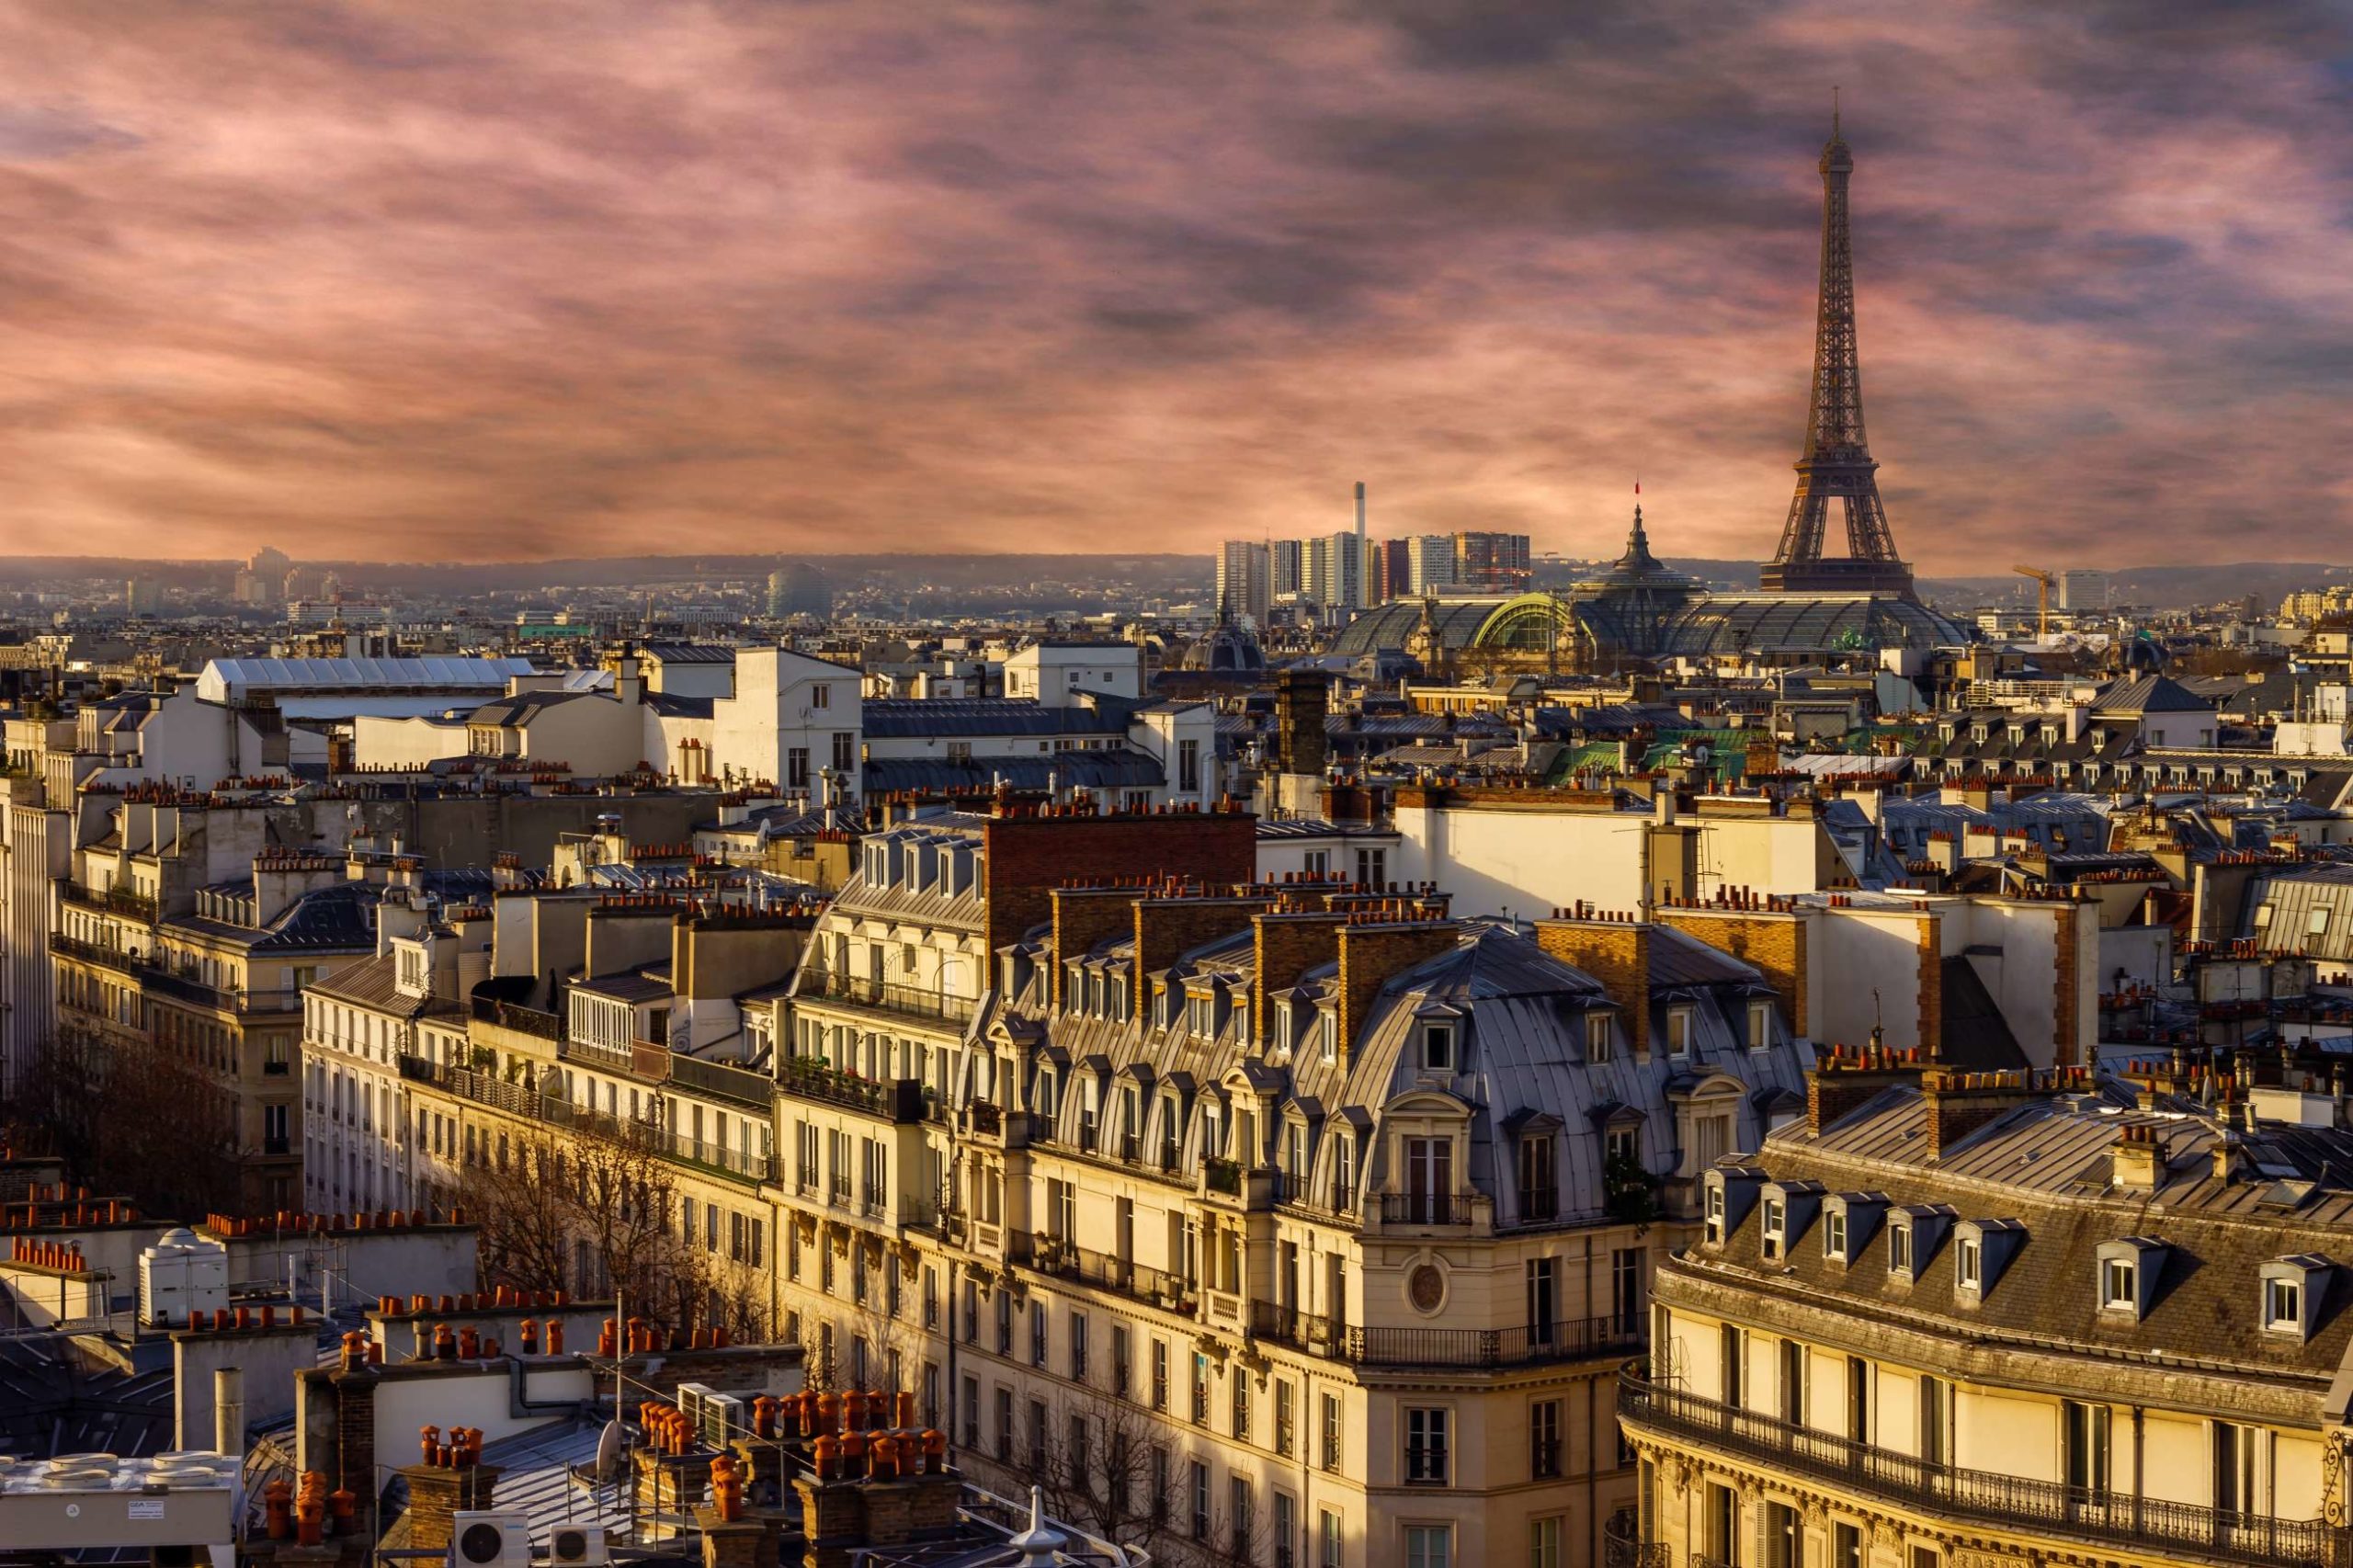 Photograph of buildings in Paris, with the Eiffel Tower in the far background.